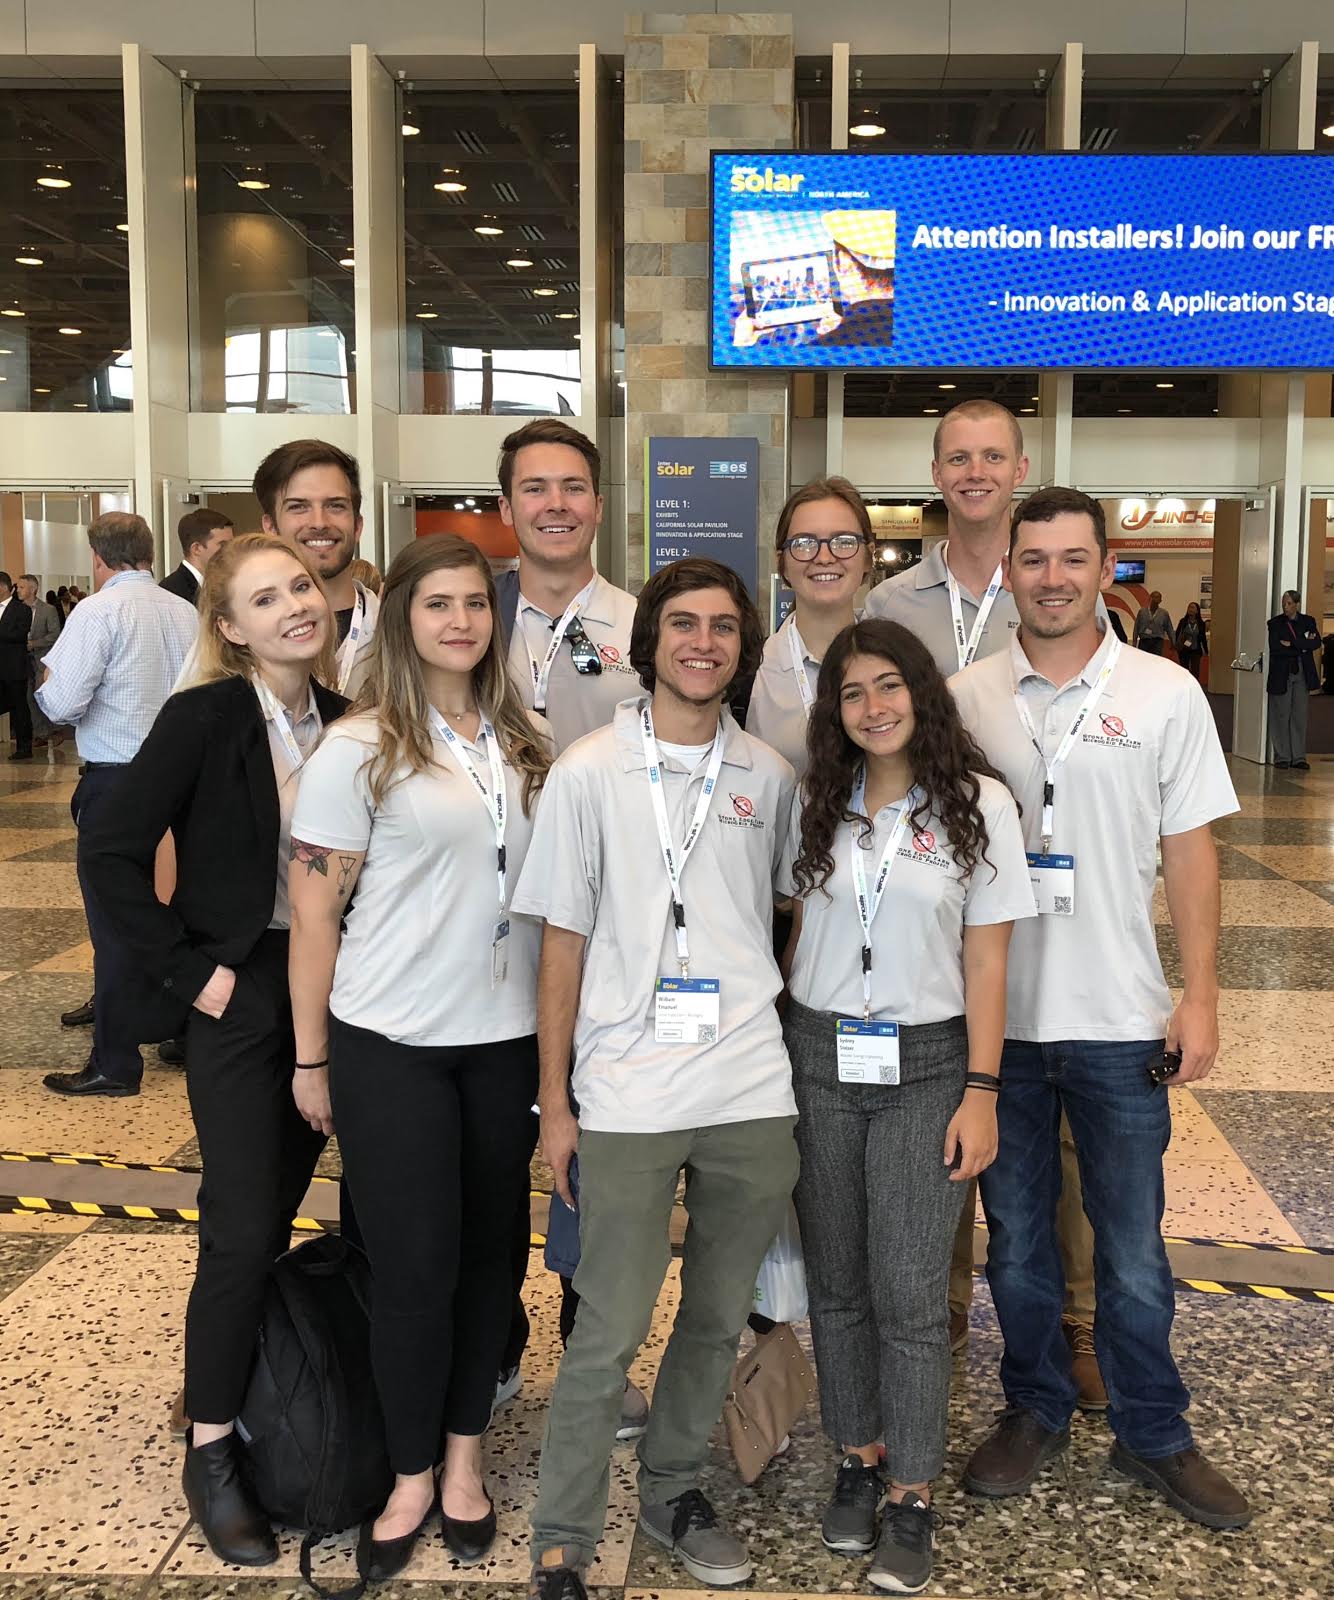 The Summer 2017 intern team at the annual Intersolar convention.